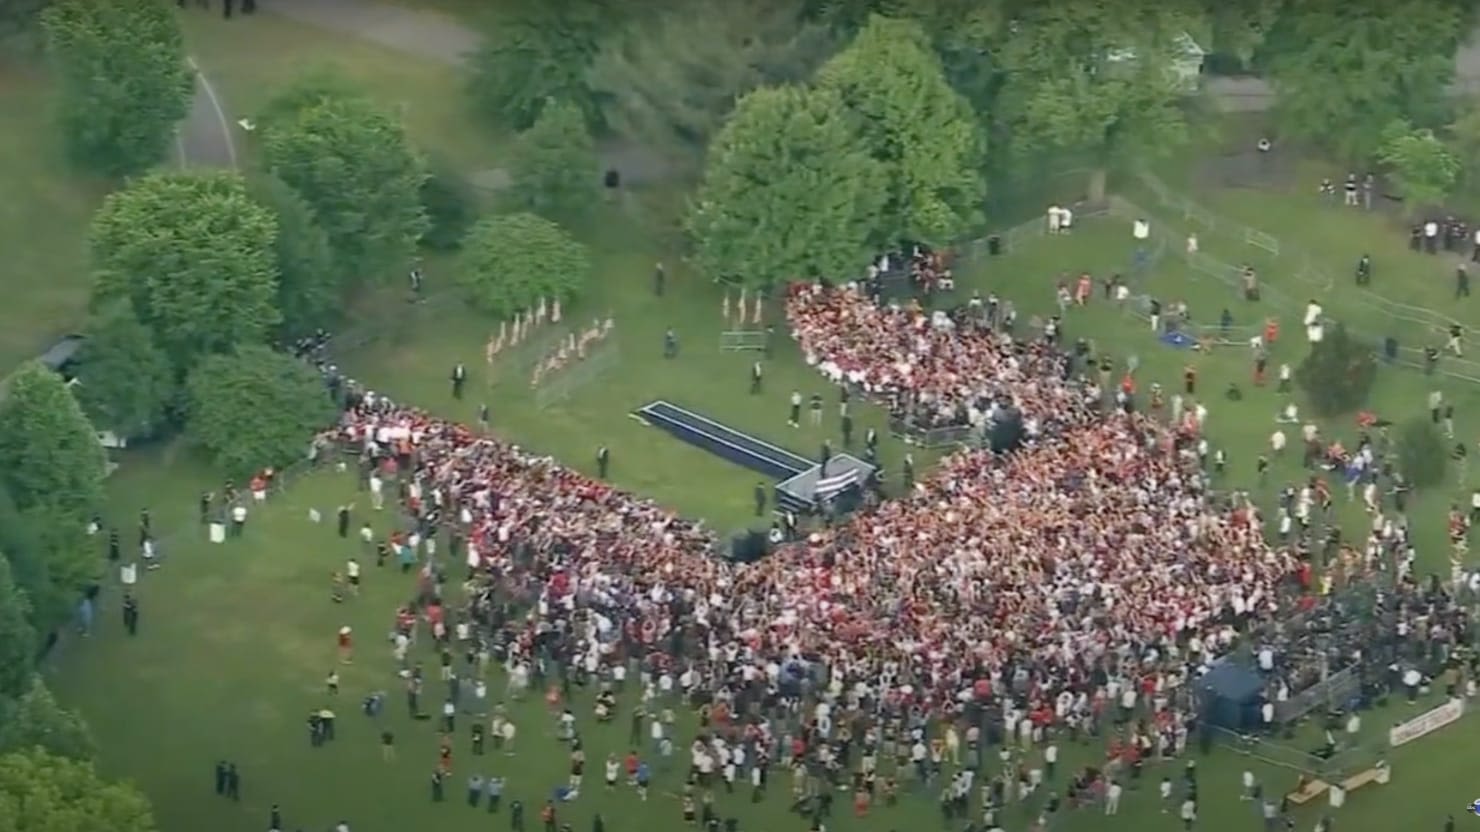 Trumpworld Claims 25,000 People Attended His Rally. Aerial Shots Show Otherwise.